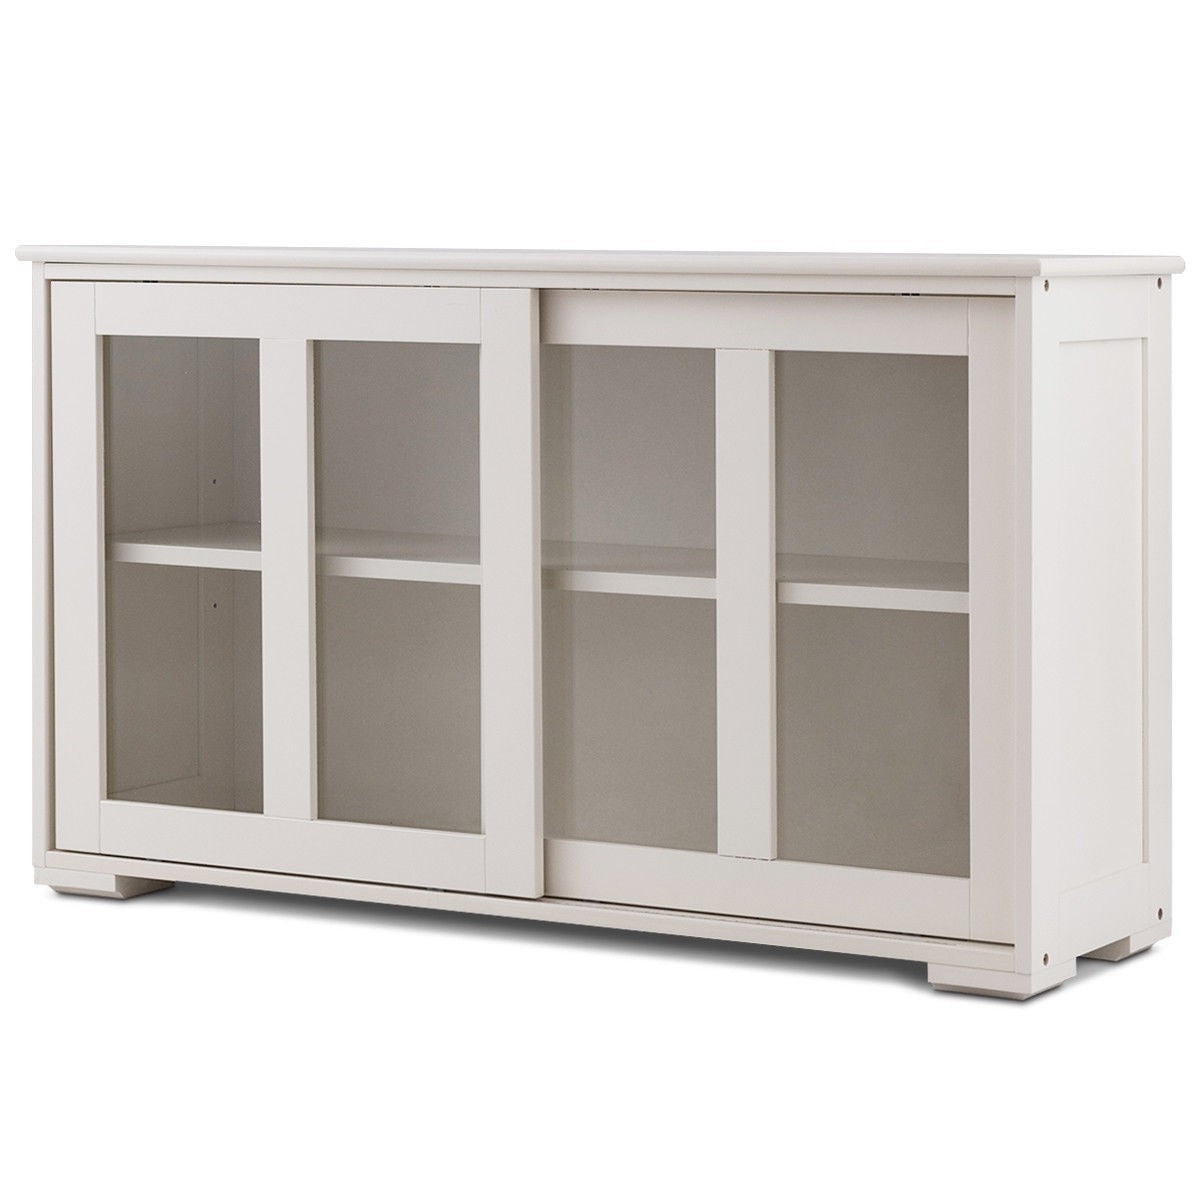 Dining > Sideboards & Buffets - Modern White Wood Buffet Sideboard Cabinet With Glass Sliding Door